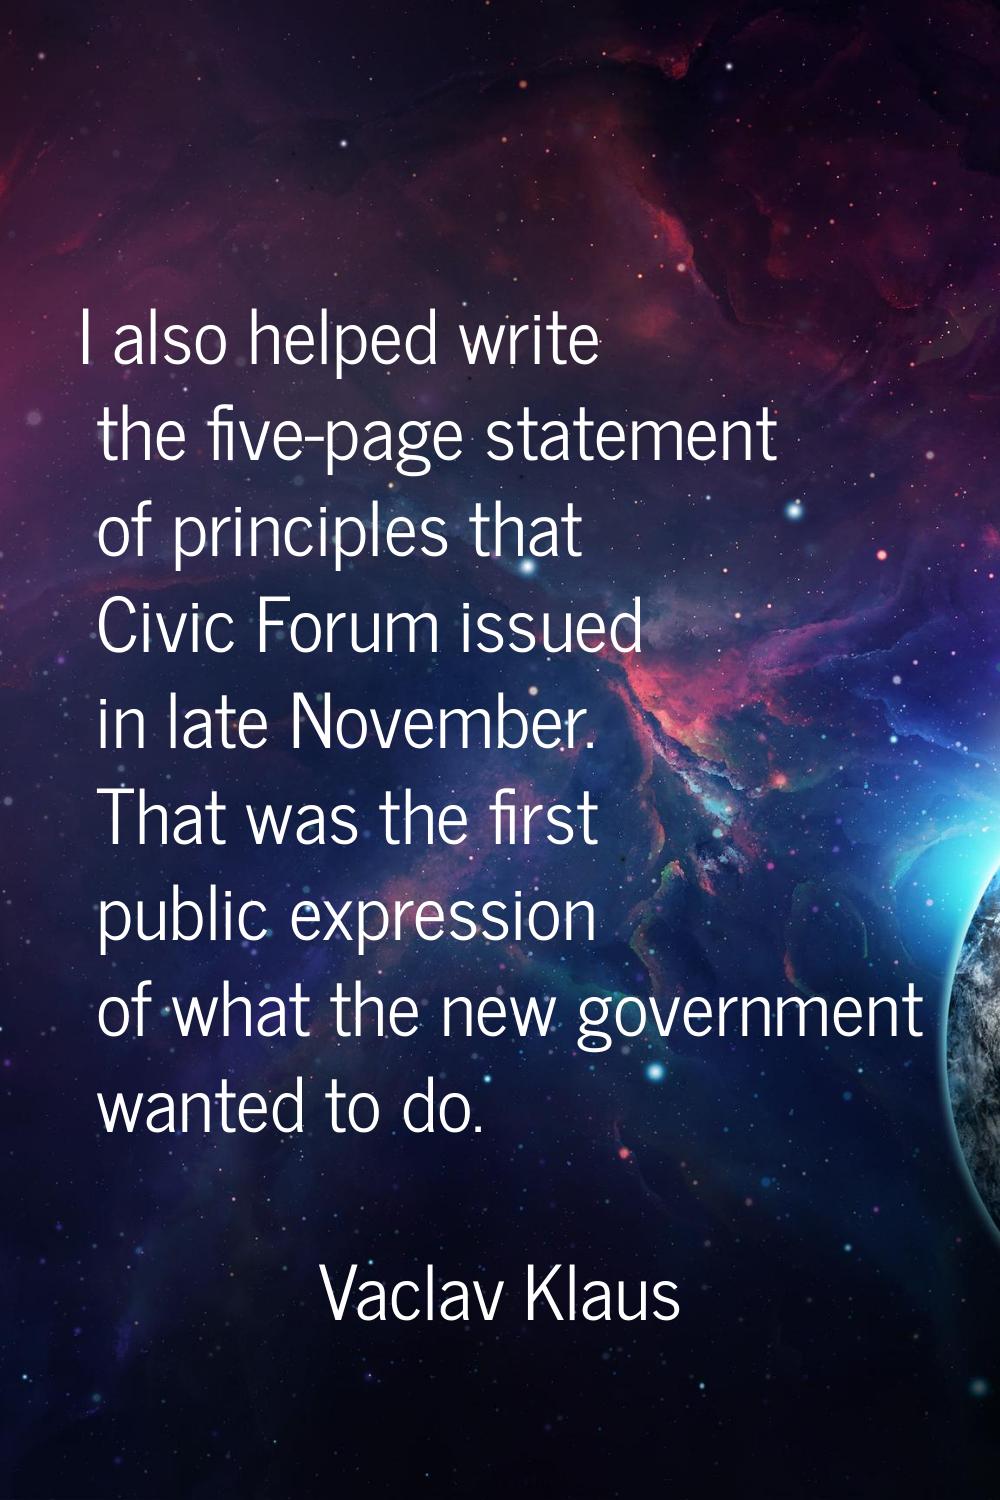 I also helped write the five-page statement of principles that Civic Forum issued in late November.